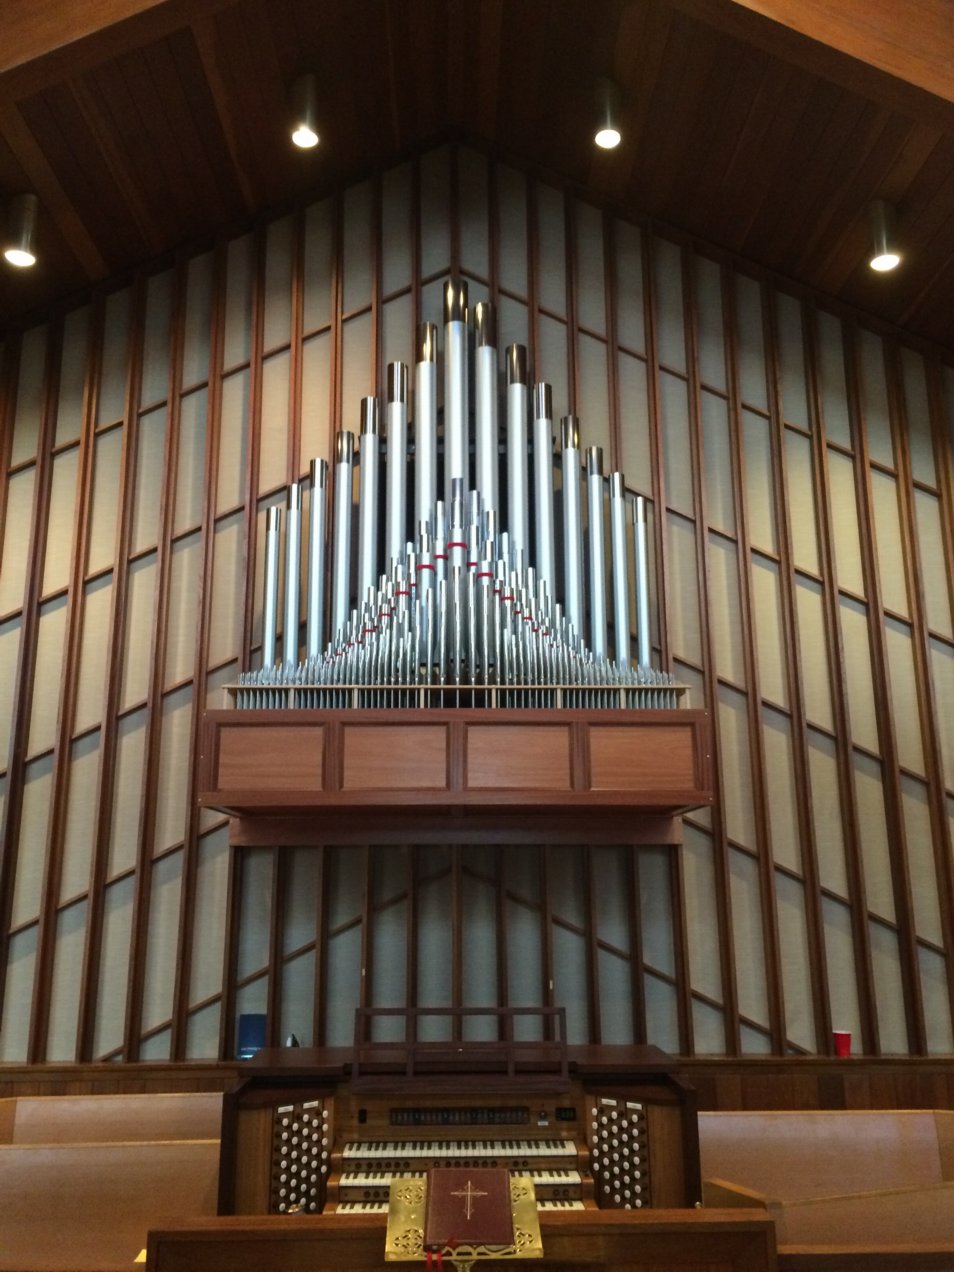 ALL SAINTS EPISCOPAL CHURCH - THREE MANUAL - This 58 stop combination project was completed in December, 2015. Faucher Organ Company has collaborated with G. Paul Music on pipe combination projects since 2002. Most of our projects involve renovating and preserving the legacy of pipe organs already installed in a church. The All Saints Episcopal project, which was a result of a collaboration with our Allen Organ associate in New York, serves as an example of our unique capability to design and build a new combination organ from the ground up. A perfect example of the “marriage” of pipes and an Allen Organ!